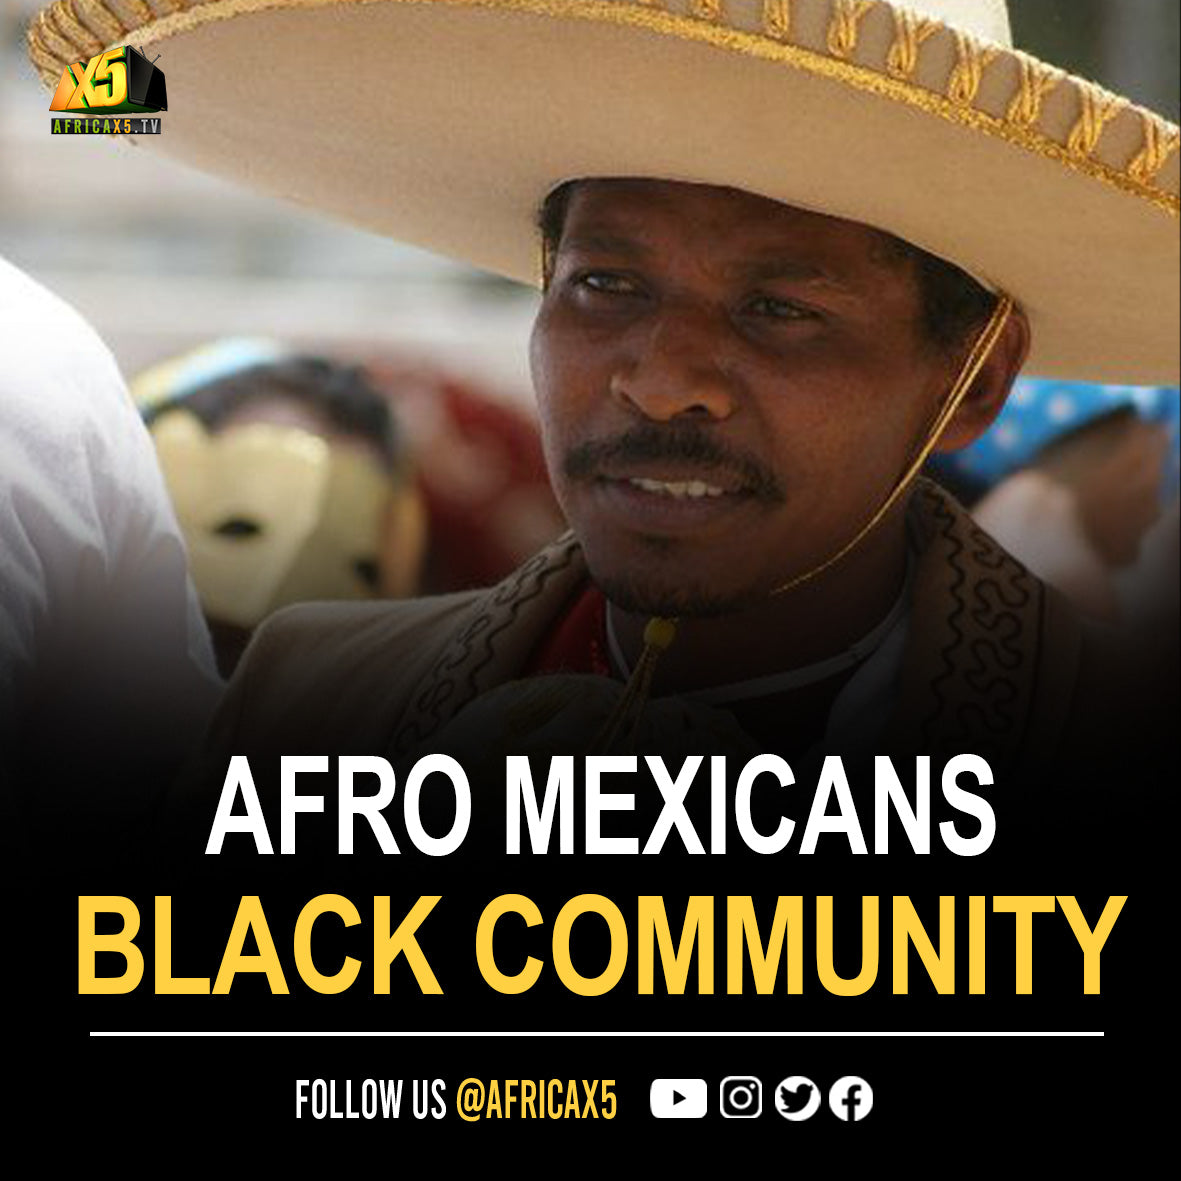 Afro-Mexicans: One of the world’s most forgotten Black communities